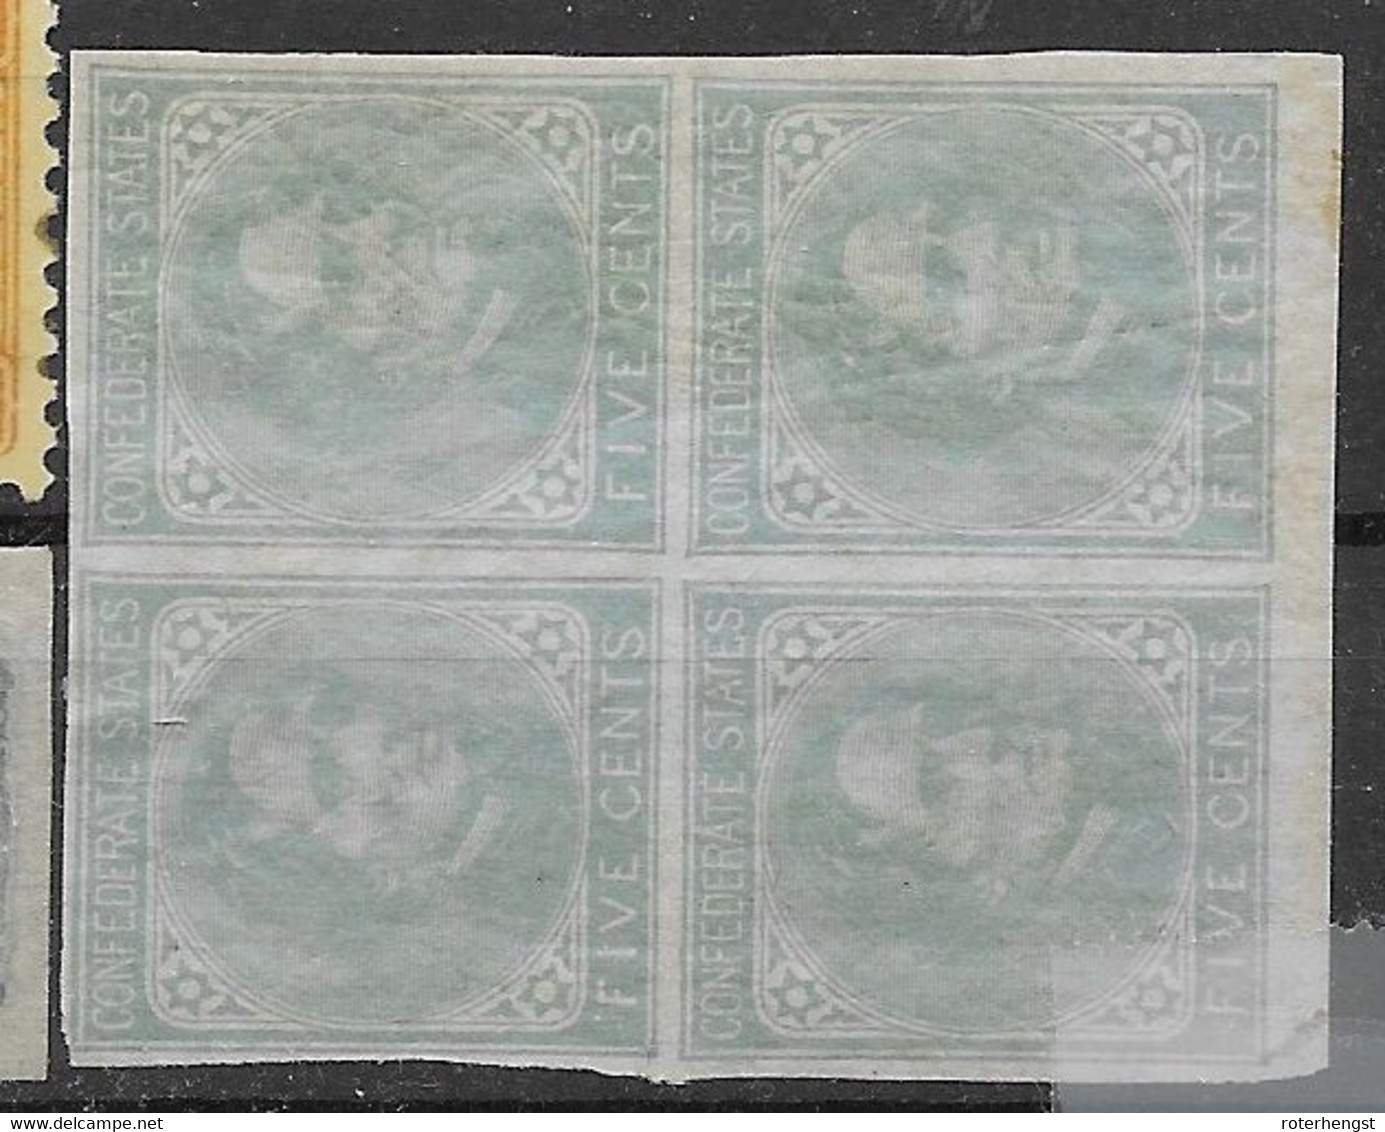 Confederate States Very Light Mint With Darkened Gum Mnh** (2 Stamps) And Mh* 1862 140 Euros (variety Very Thin Paper) - 1861-65 Confederate States